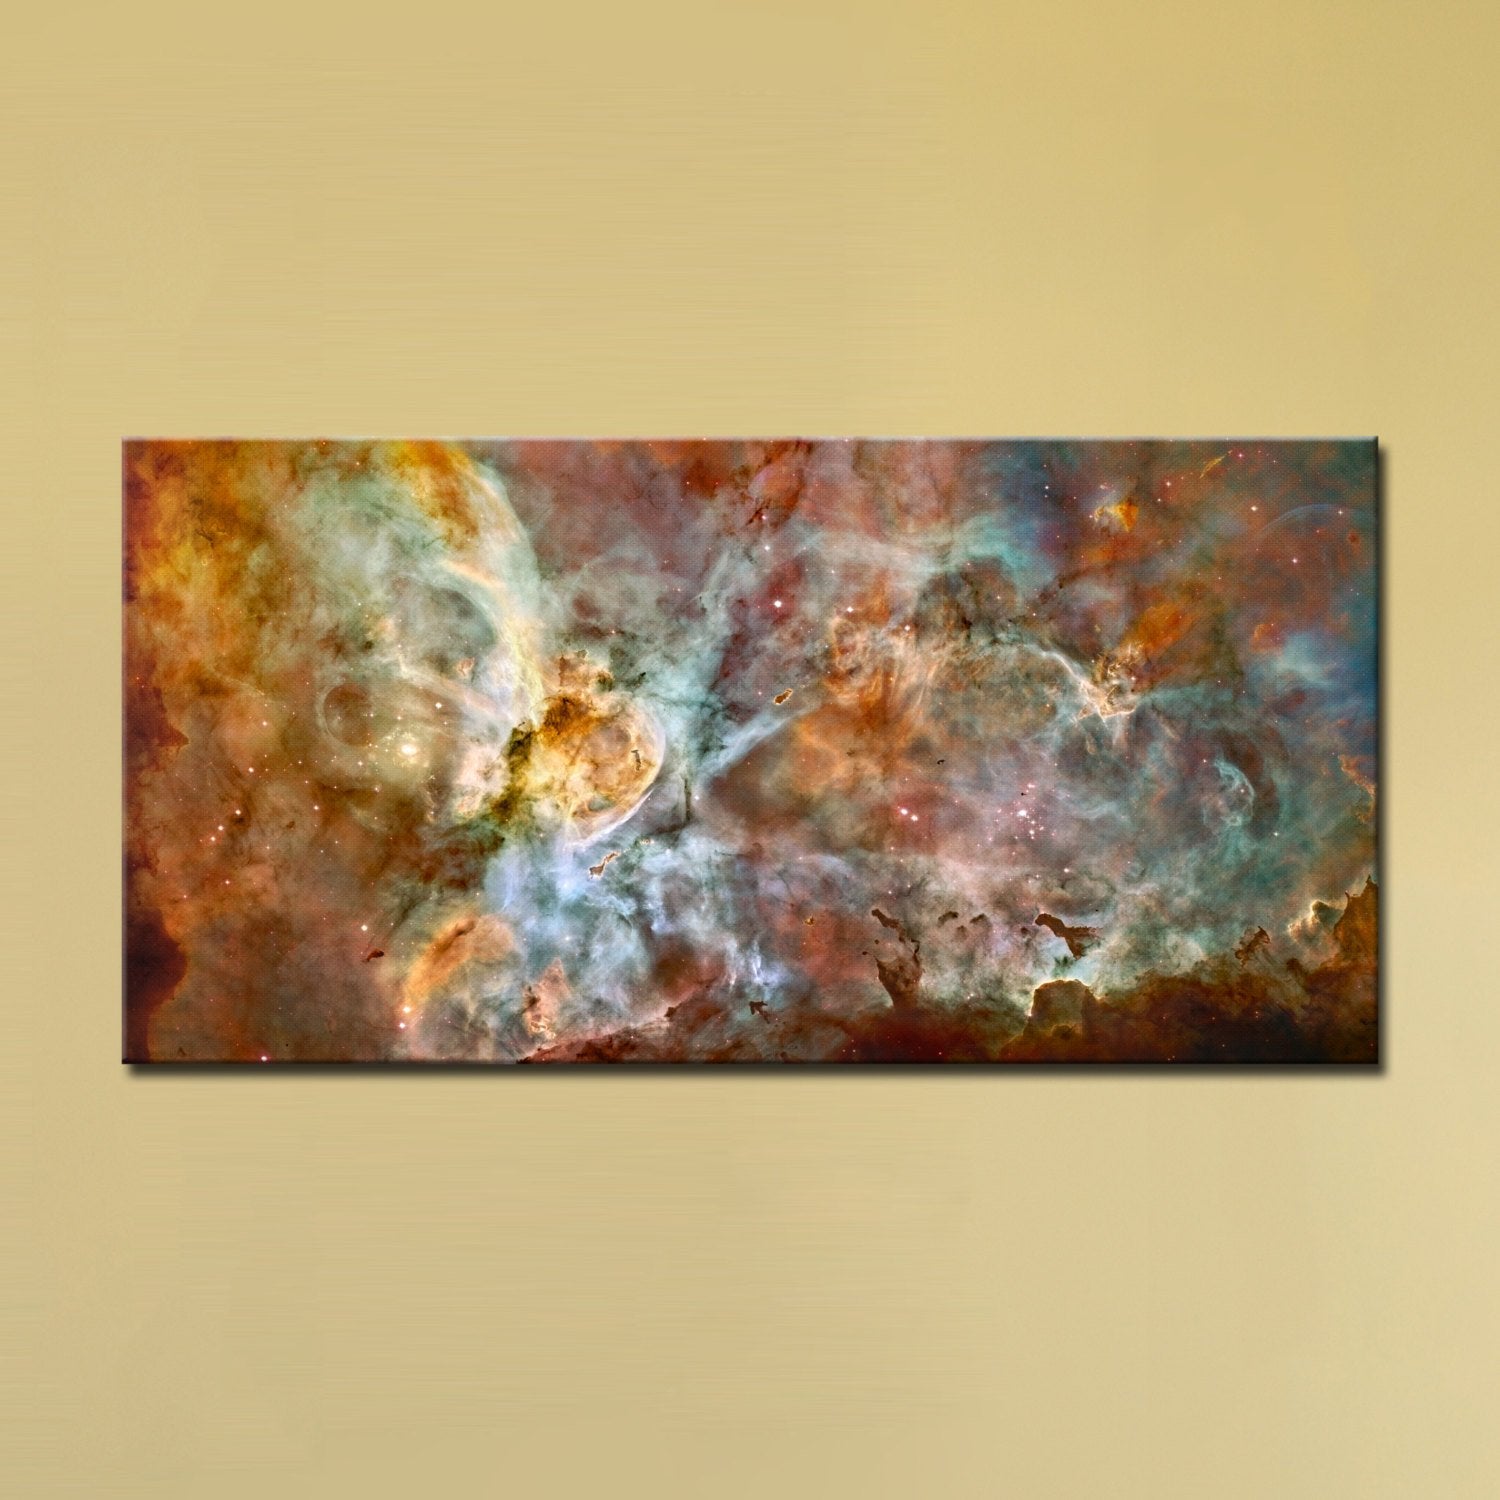 The Carina Nebula, Star Birth in the Extreme (Color) (16" x 24") - Canvas Wrap Print